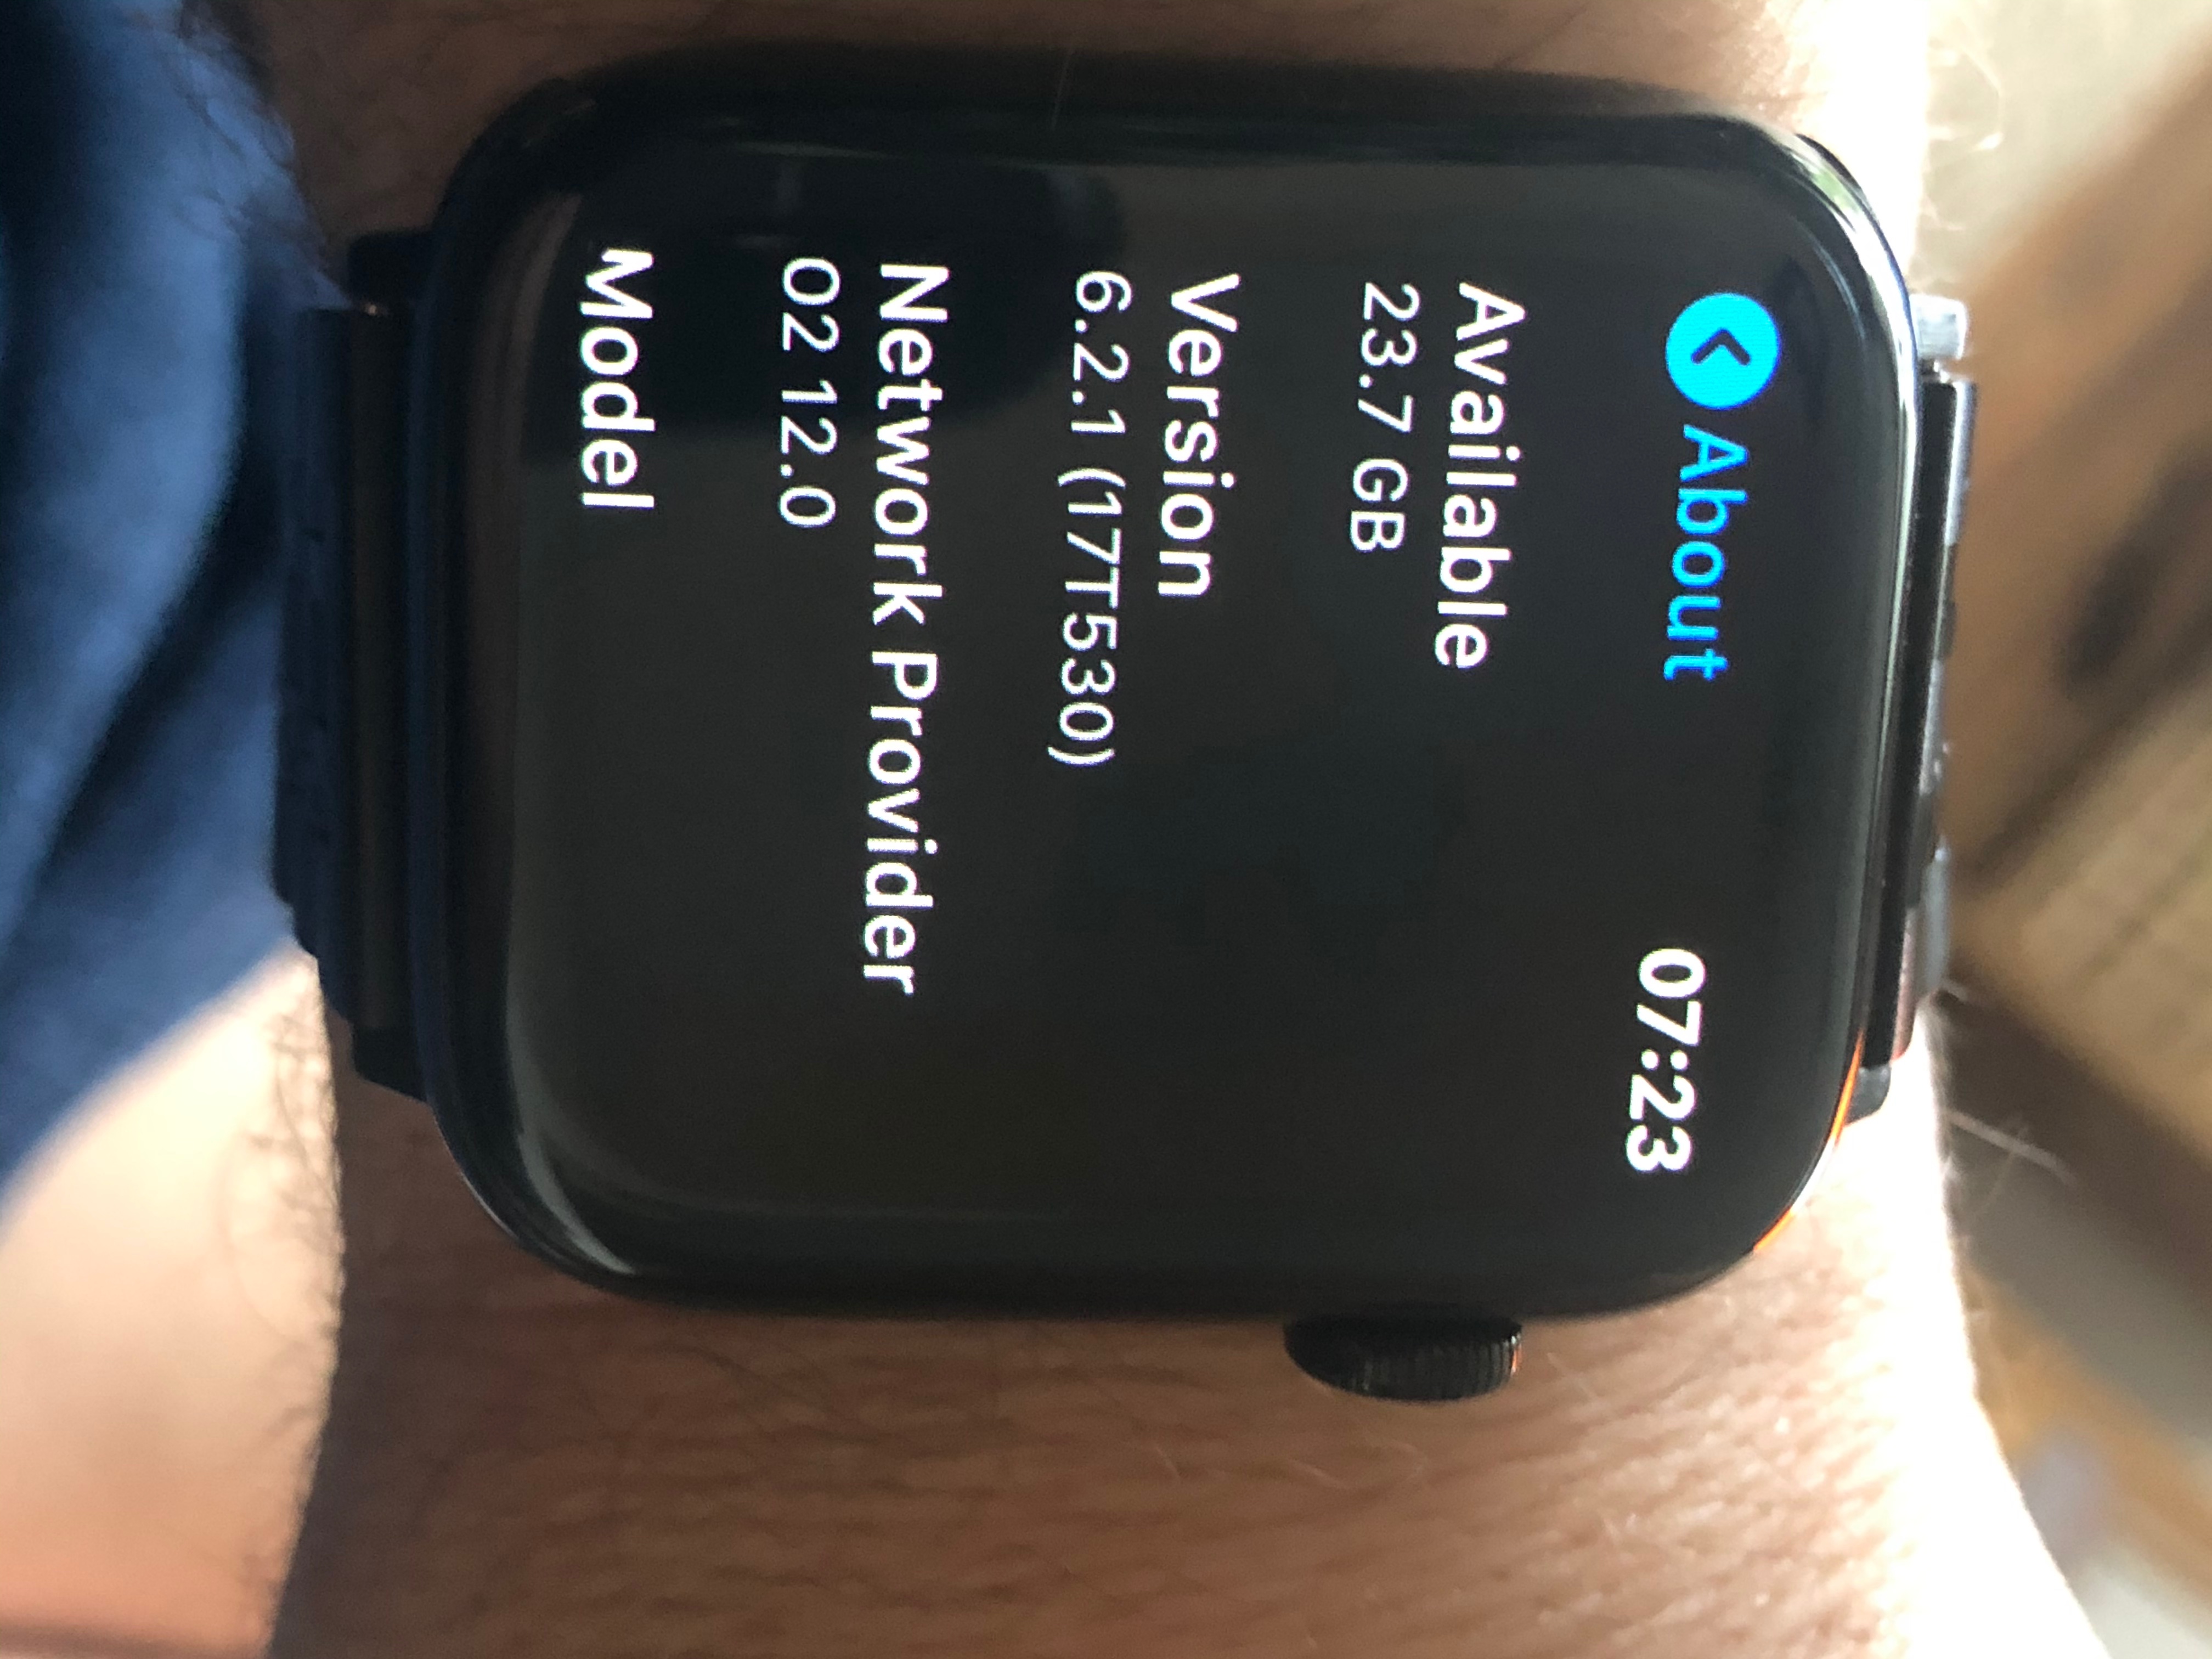 Apple Watch Battery Drain Fast Online Discounted, Save 40 jlcatj.gob.mx